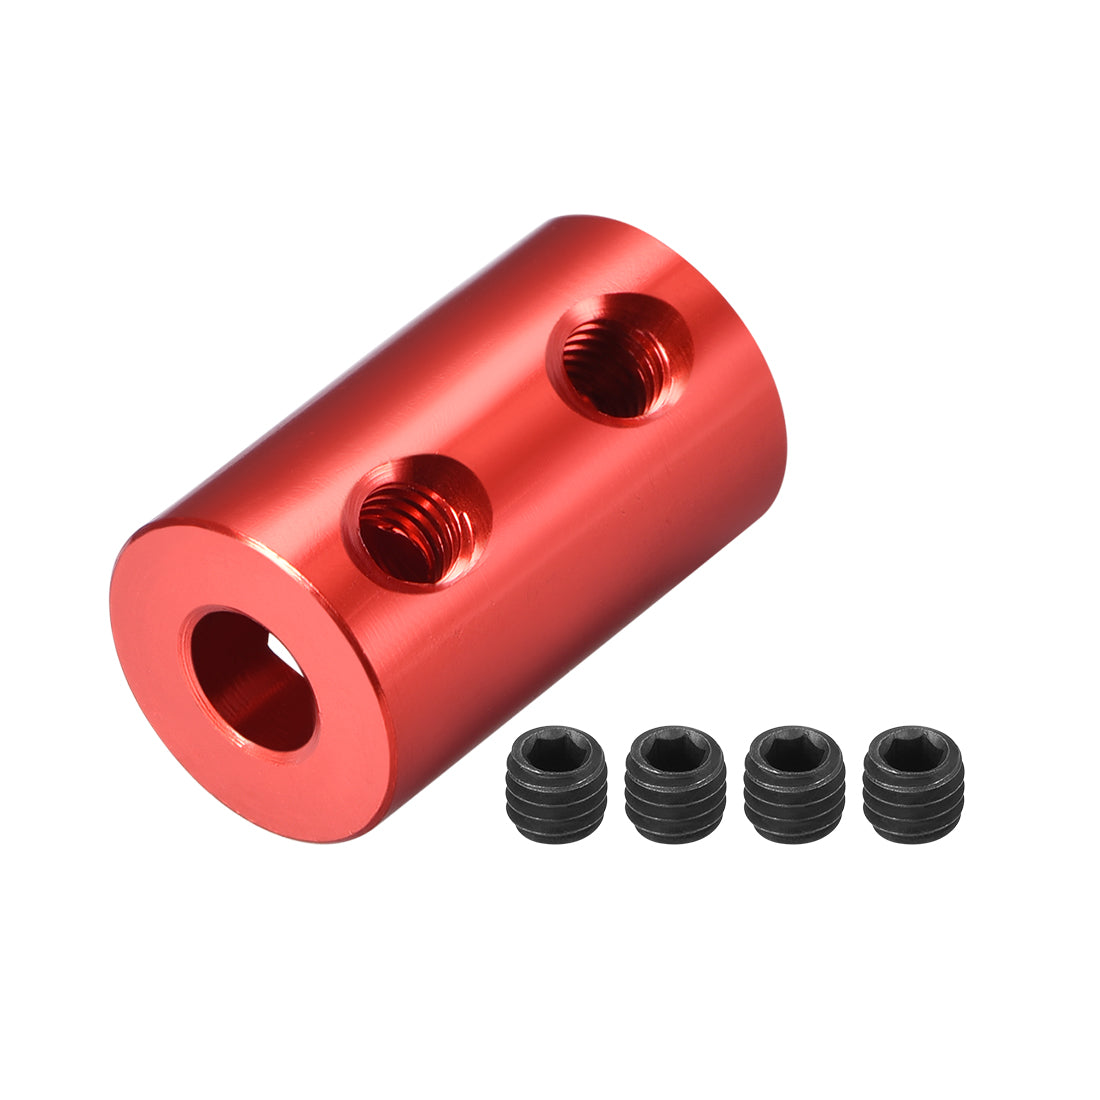 uxcell Uxcell Shaft Coupling 3mm to 5mm Bore L20xD12 Robot Motor Wheel Rigid Coupler Red